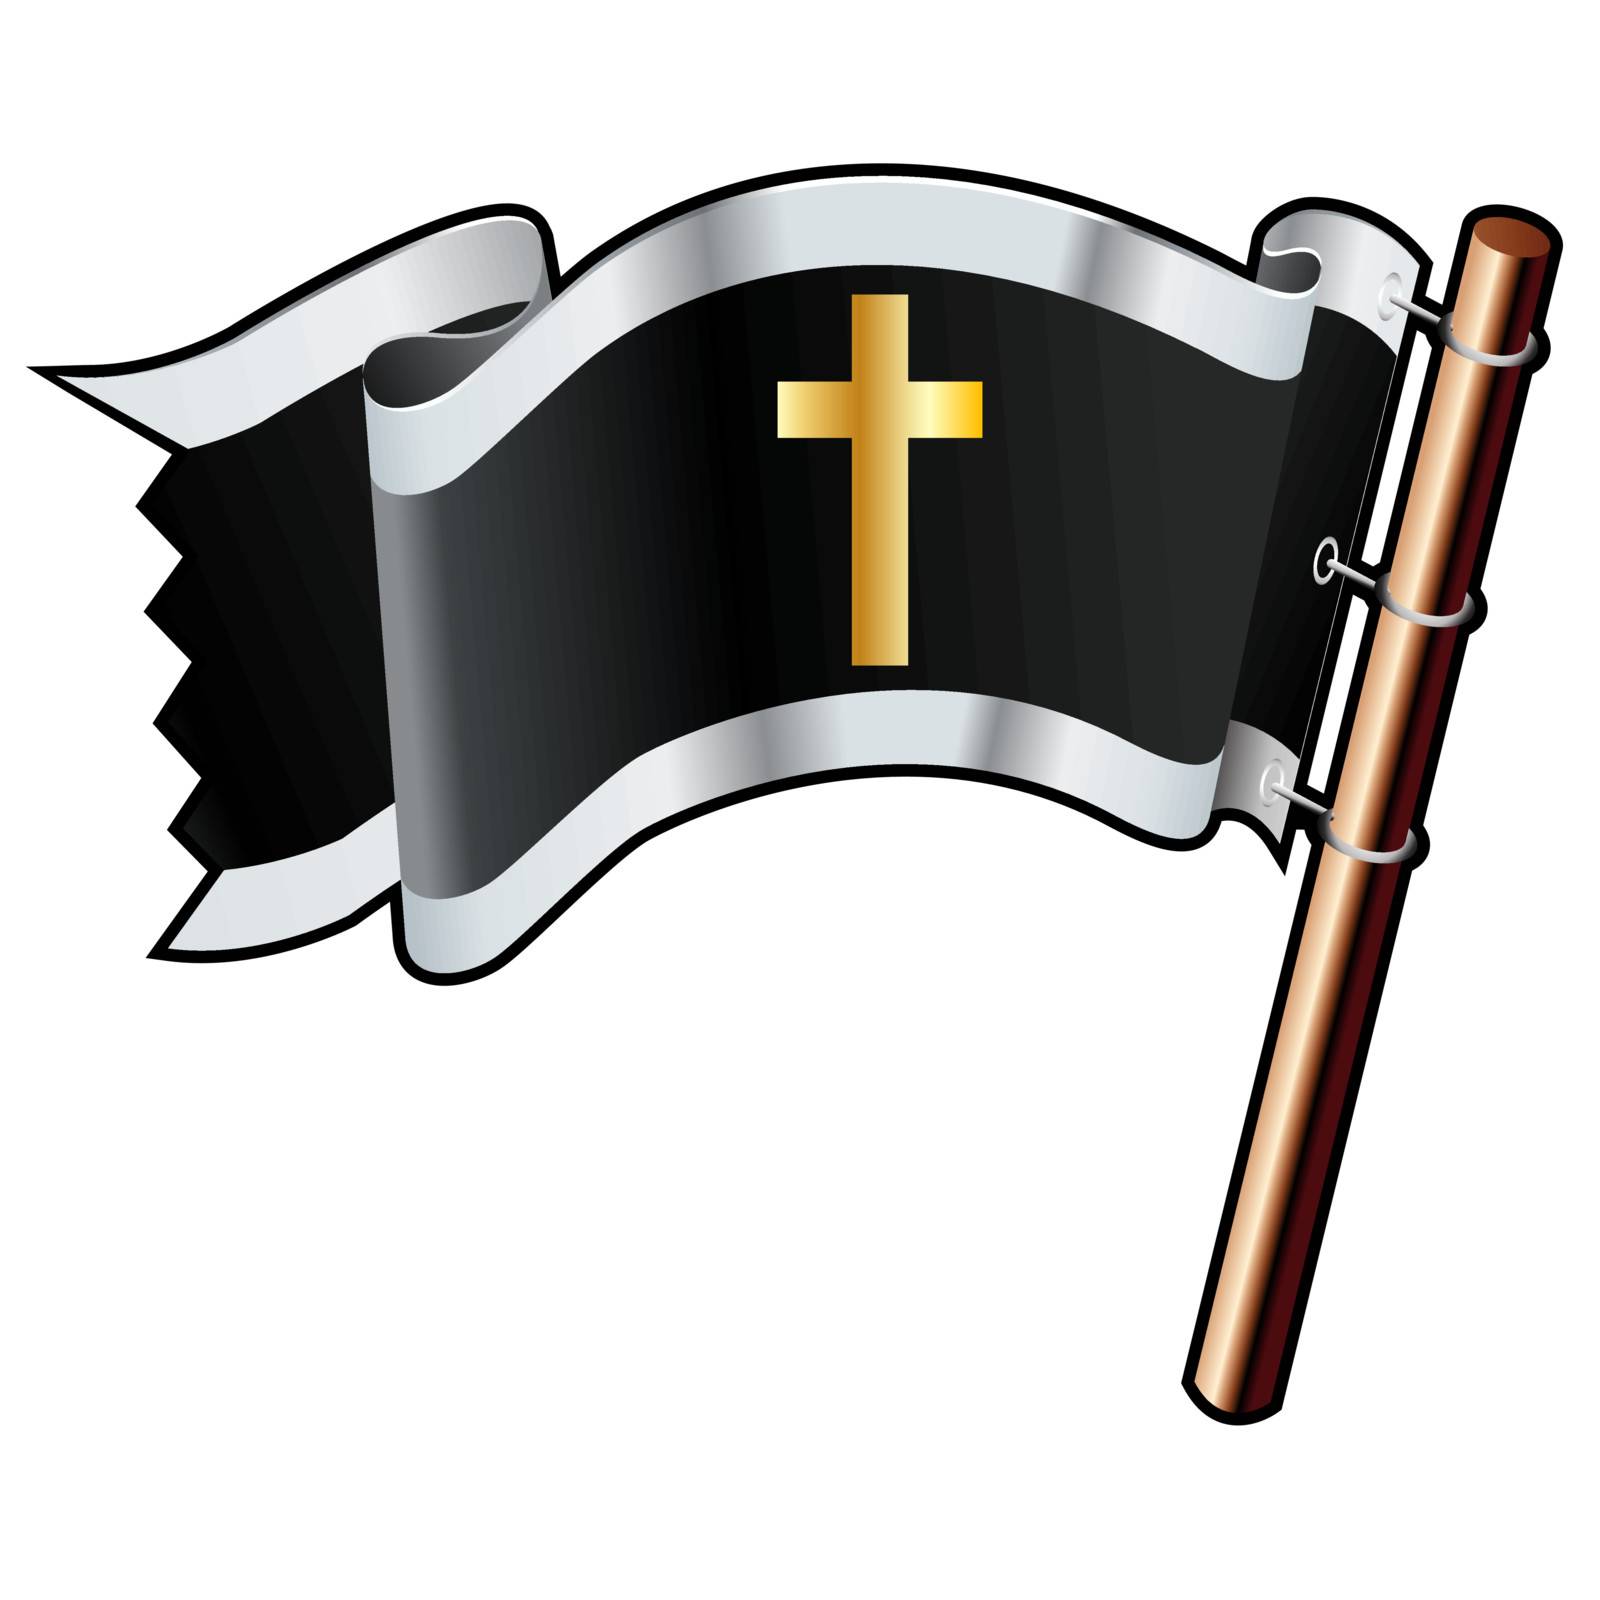 Christian cross religious icon on black, silver, and gold vector flag good for use on websites, in print, or on promotional materials